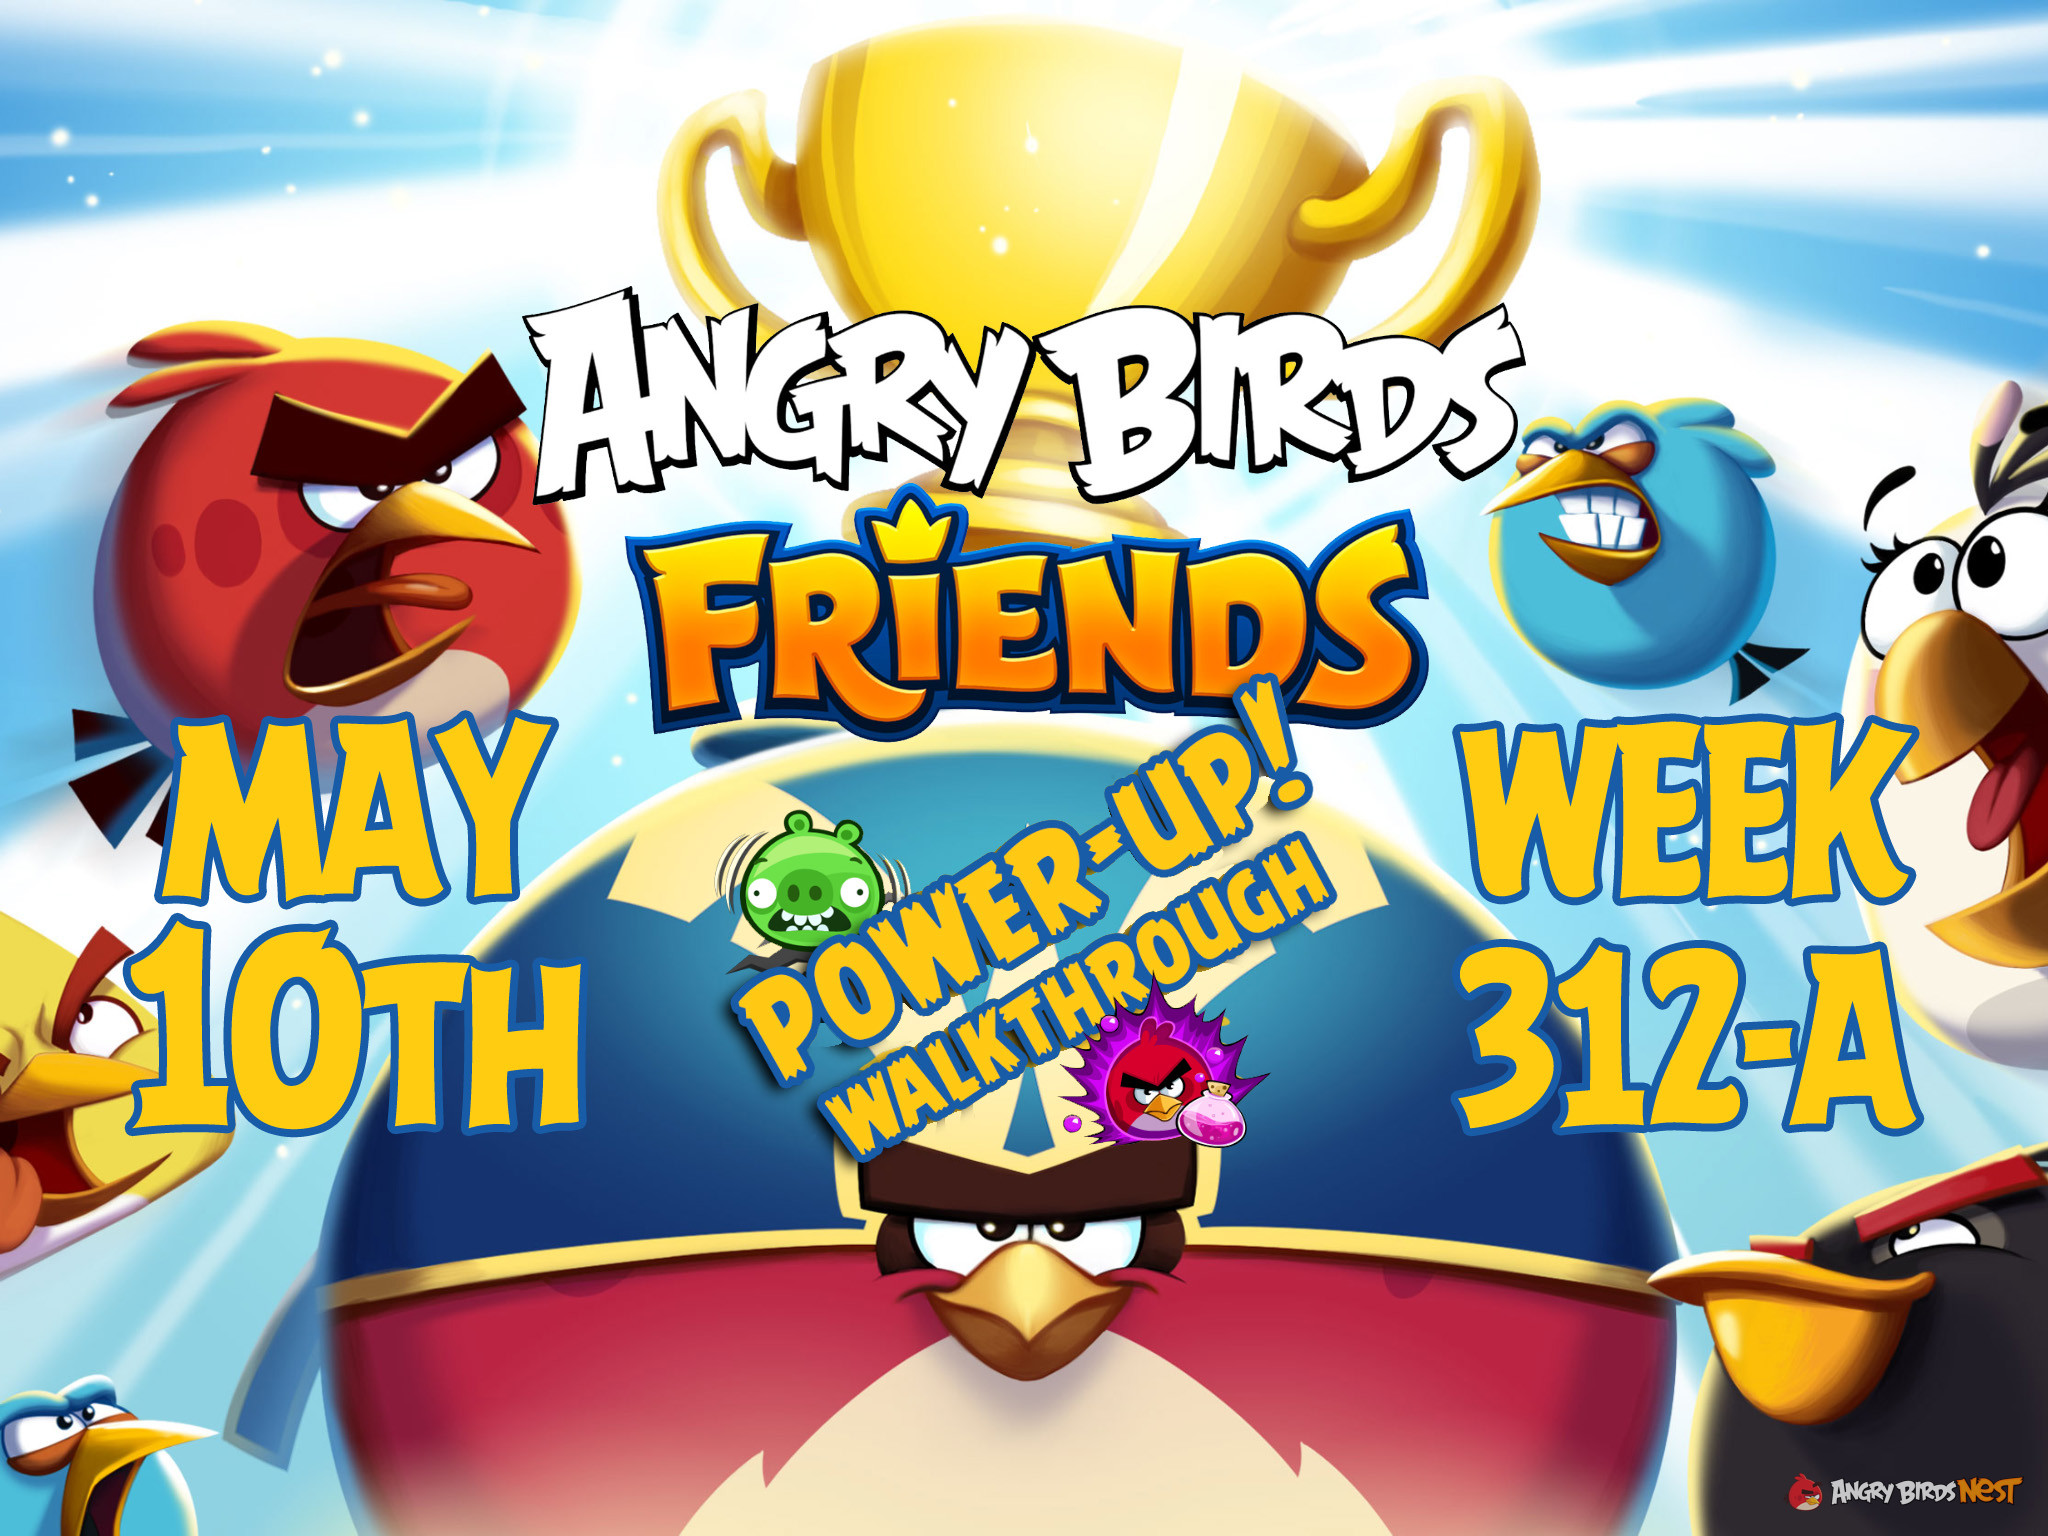 Angry Birds Friends Tournament Week 312-A Feature Image PU